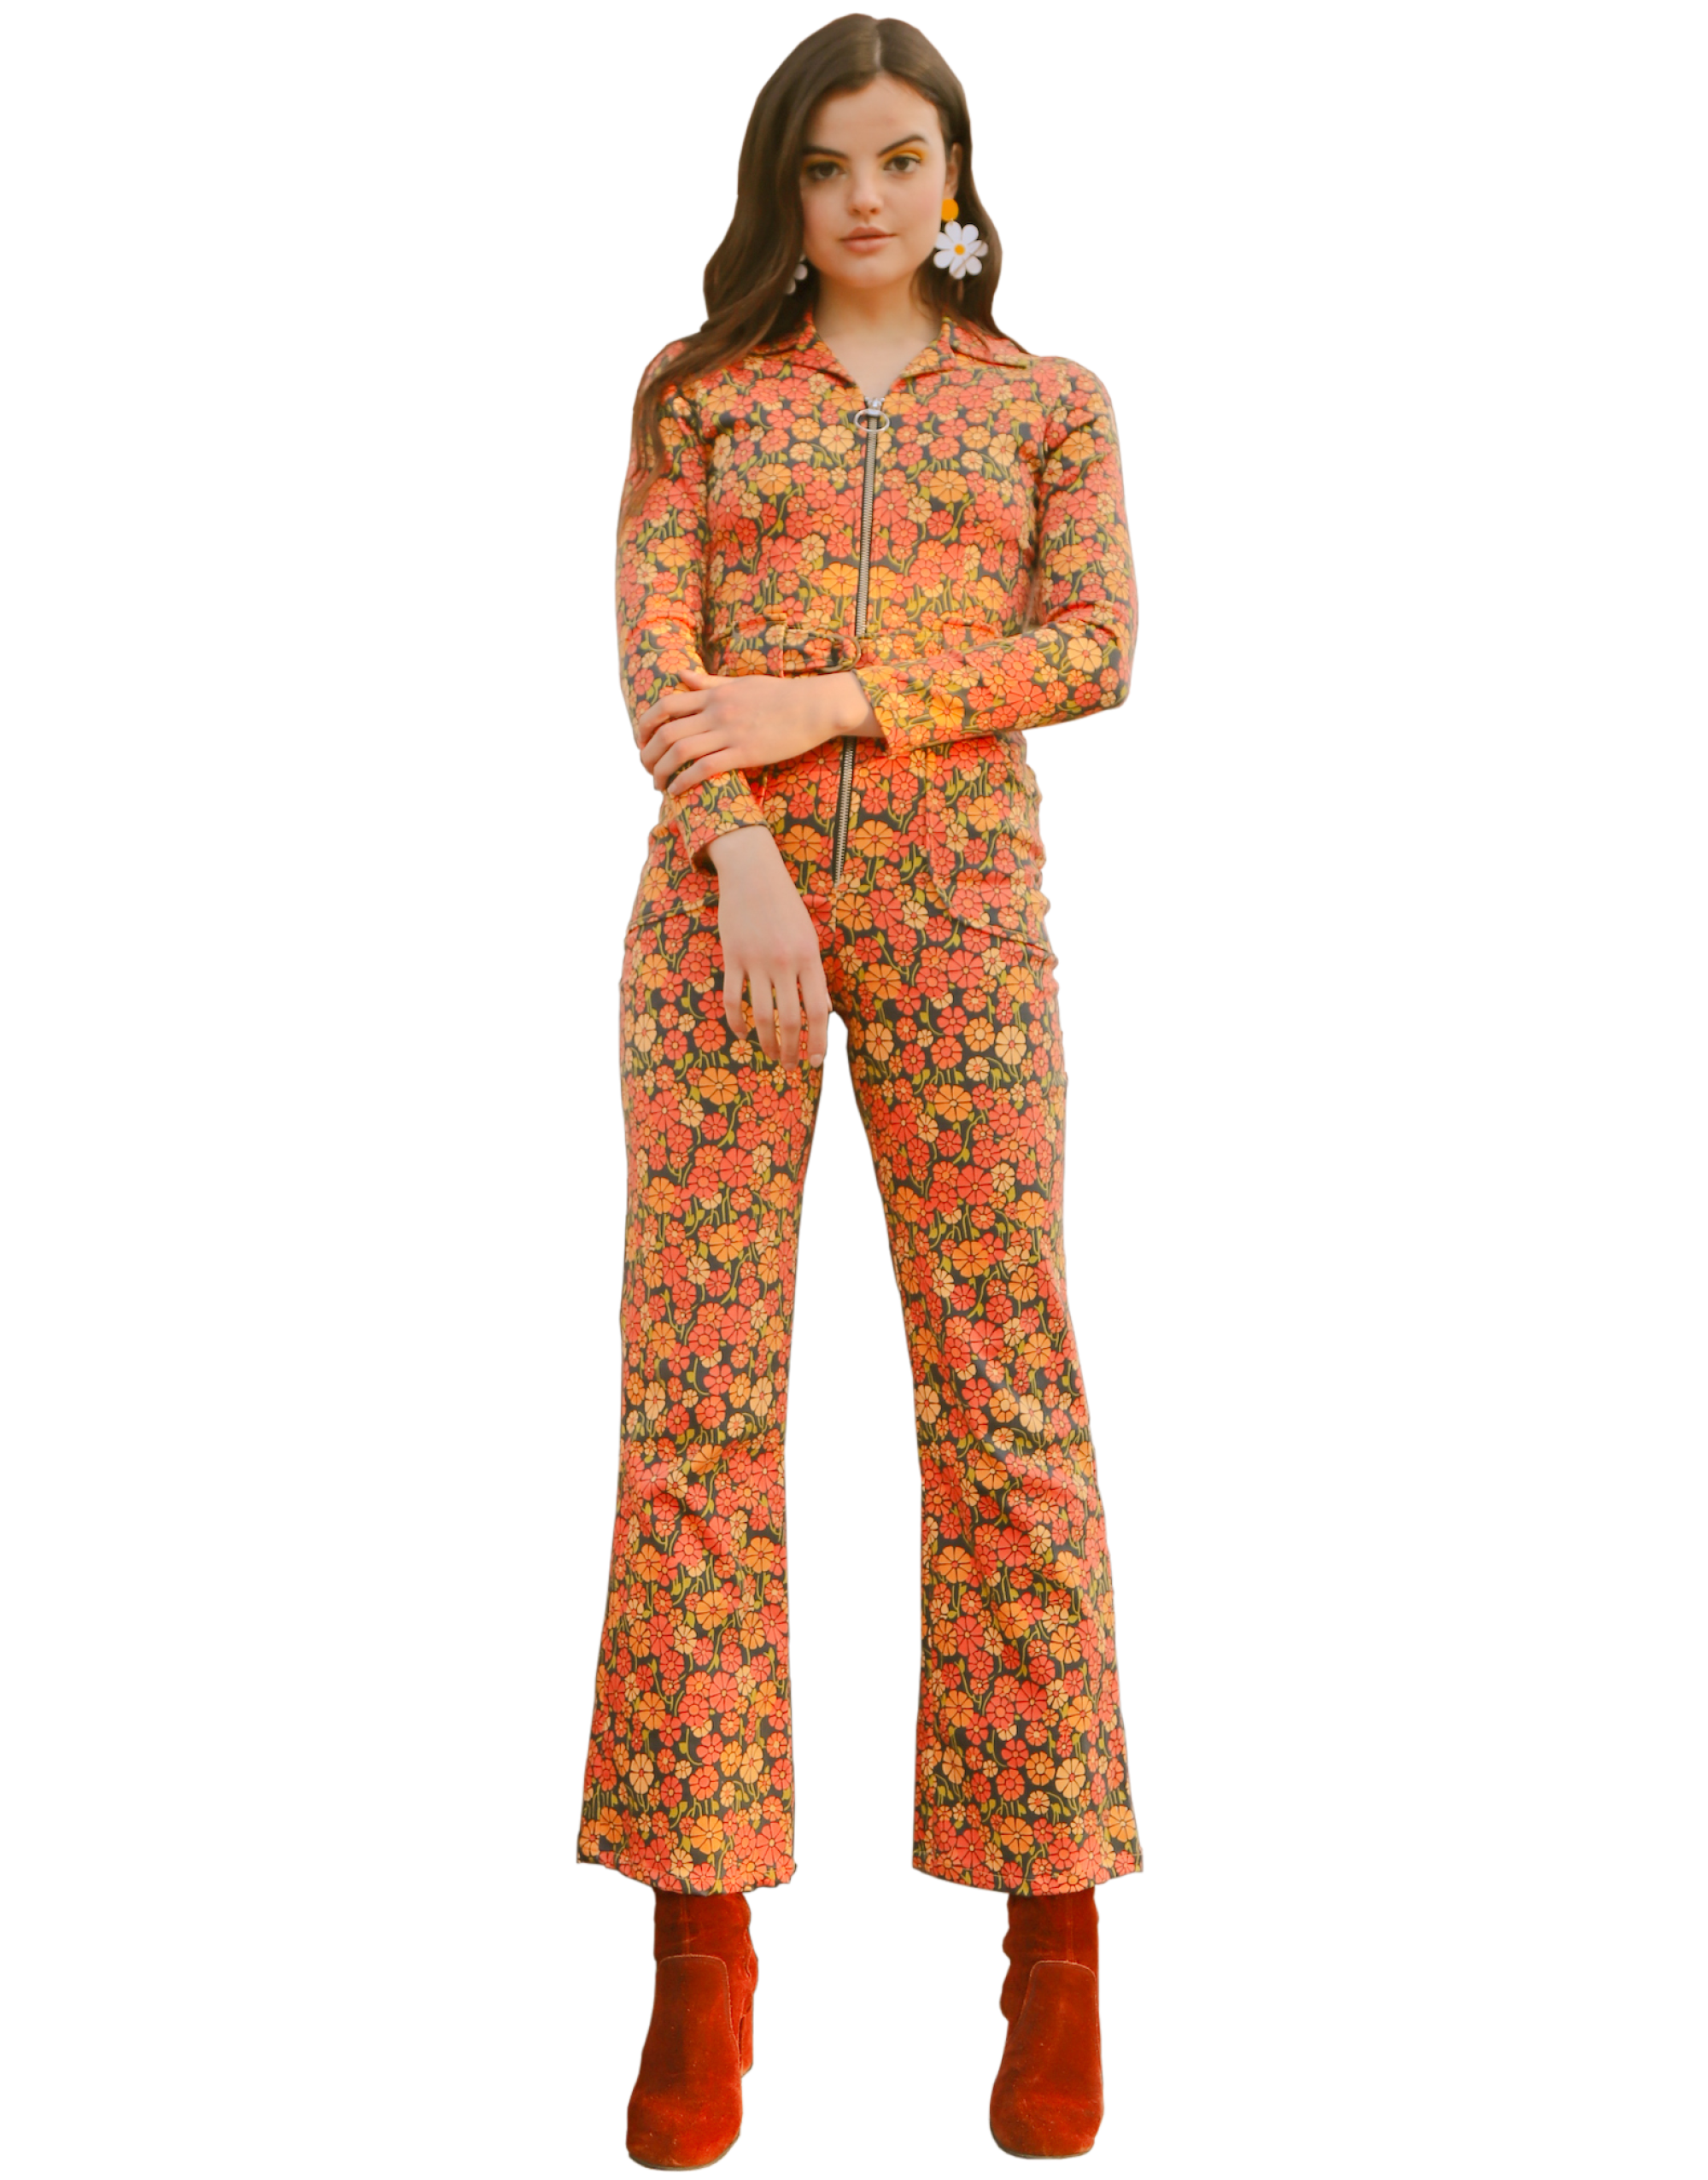 A woman models Miracle Eye's ’70s-inspired Marigold jumpsuit